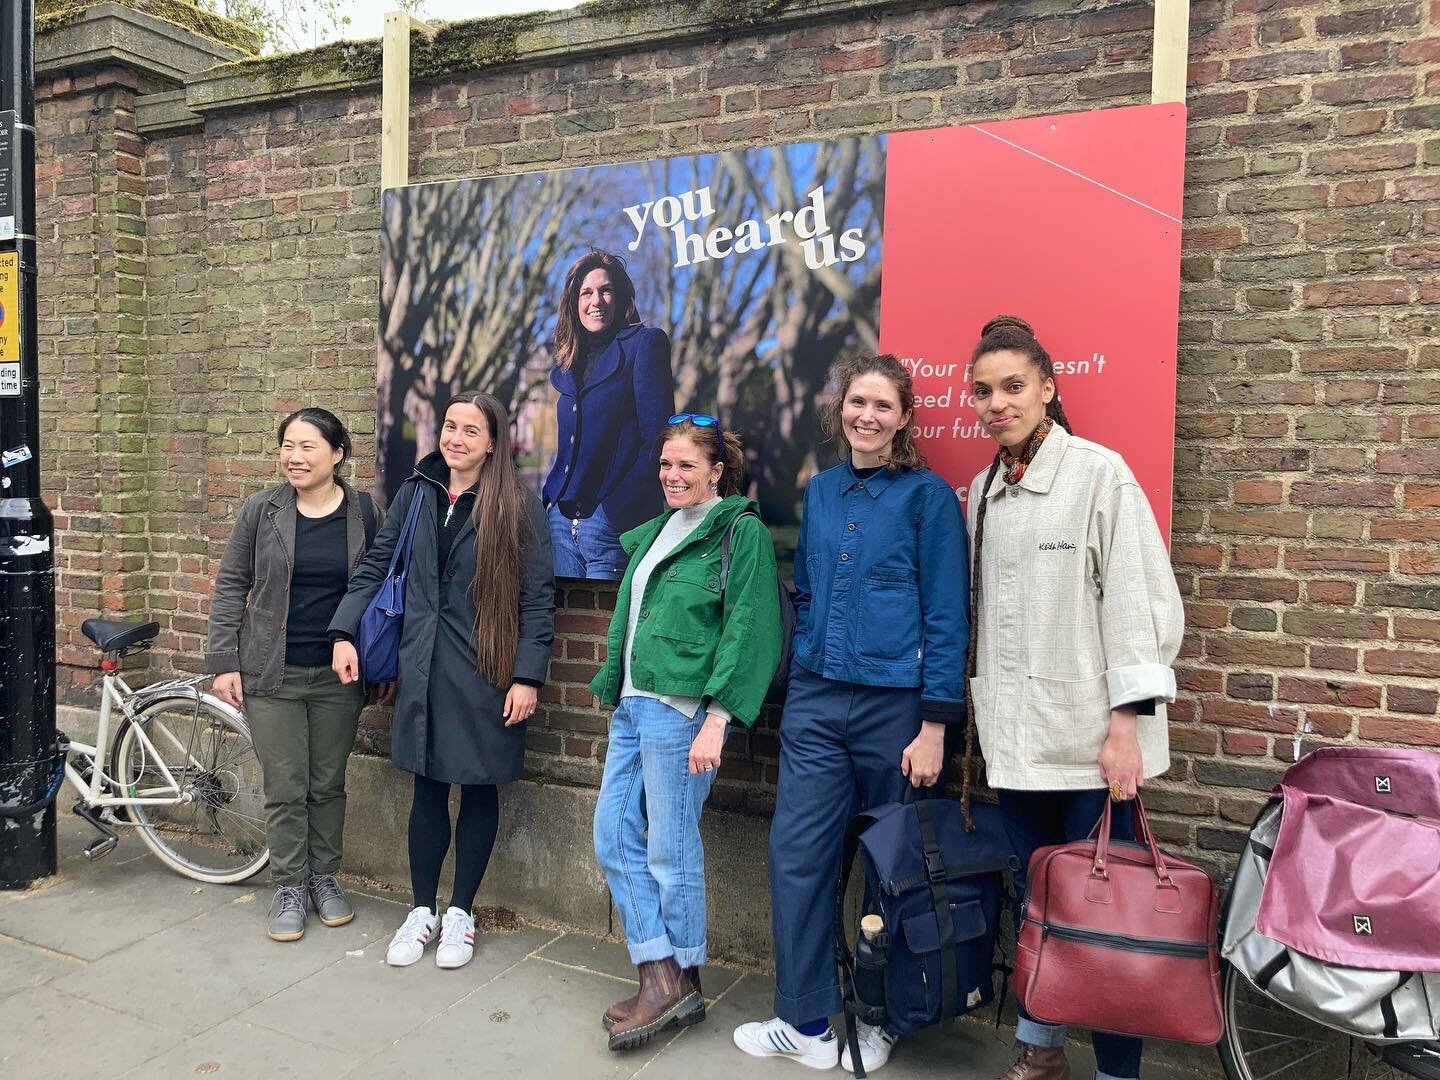 Had the absolute honour of collaborating with these women to make #youheardus happen in Cambridge. It was an absolute joy to walk around the city together today and see your portraits and words taking up space.

Thank you @camillagreenwellphotography